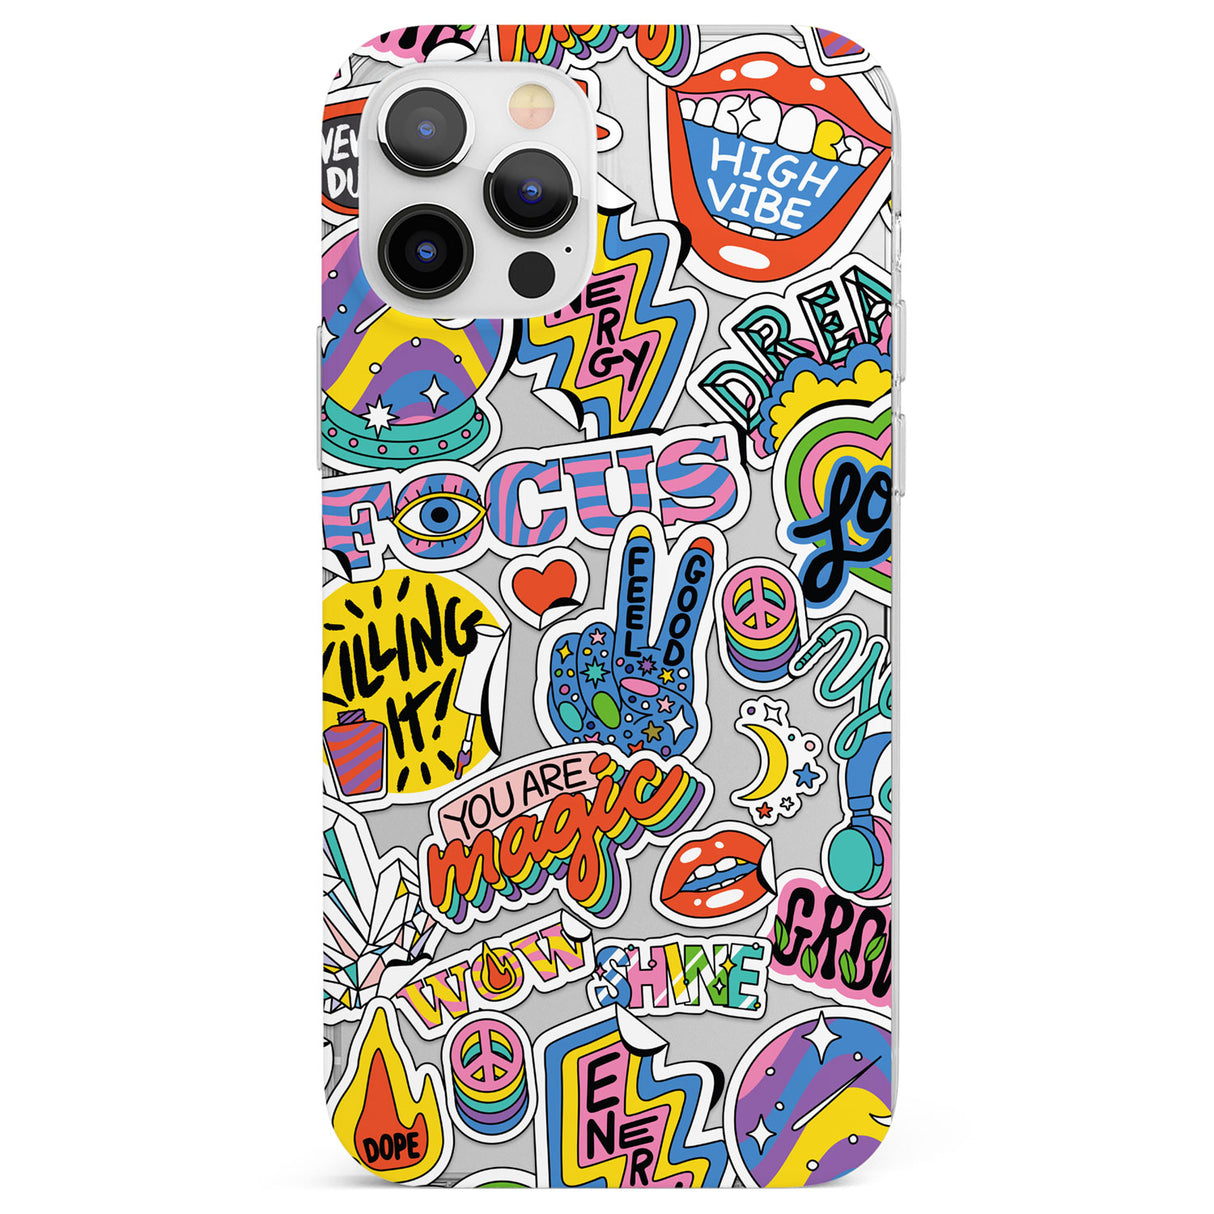 Magic Sticker Collage Phone Case for iPhone 12 Pro